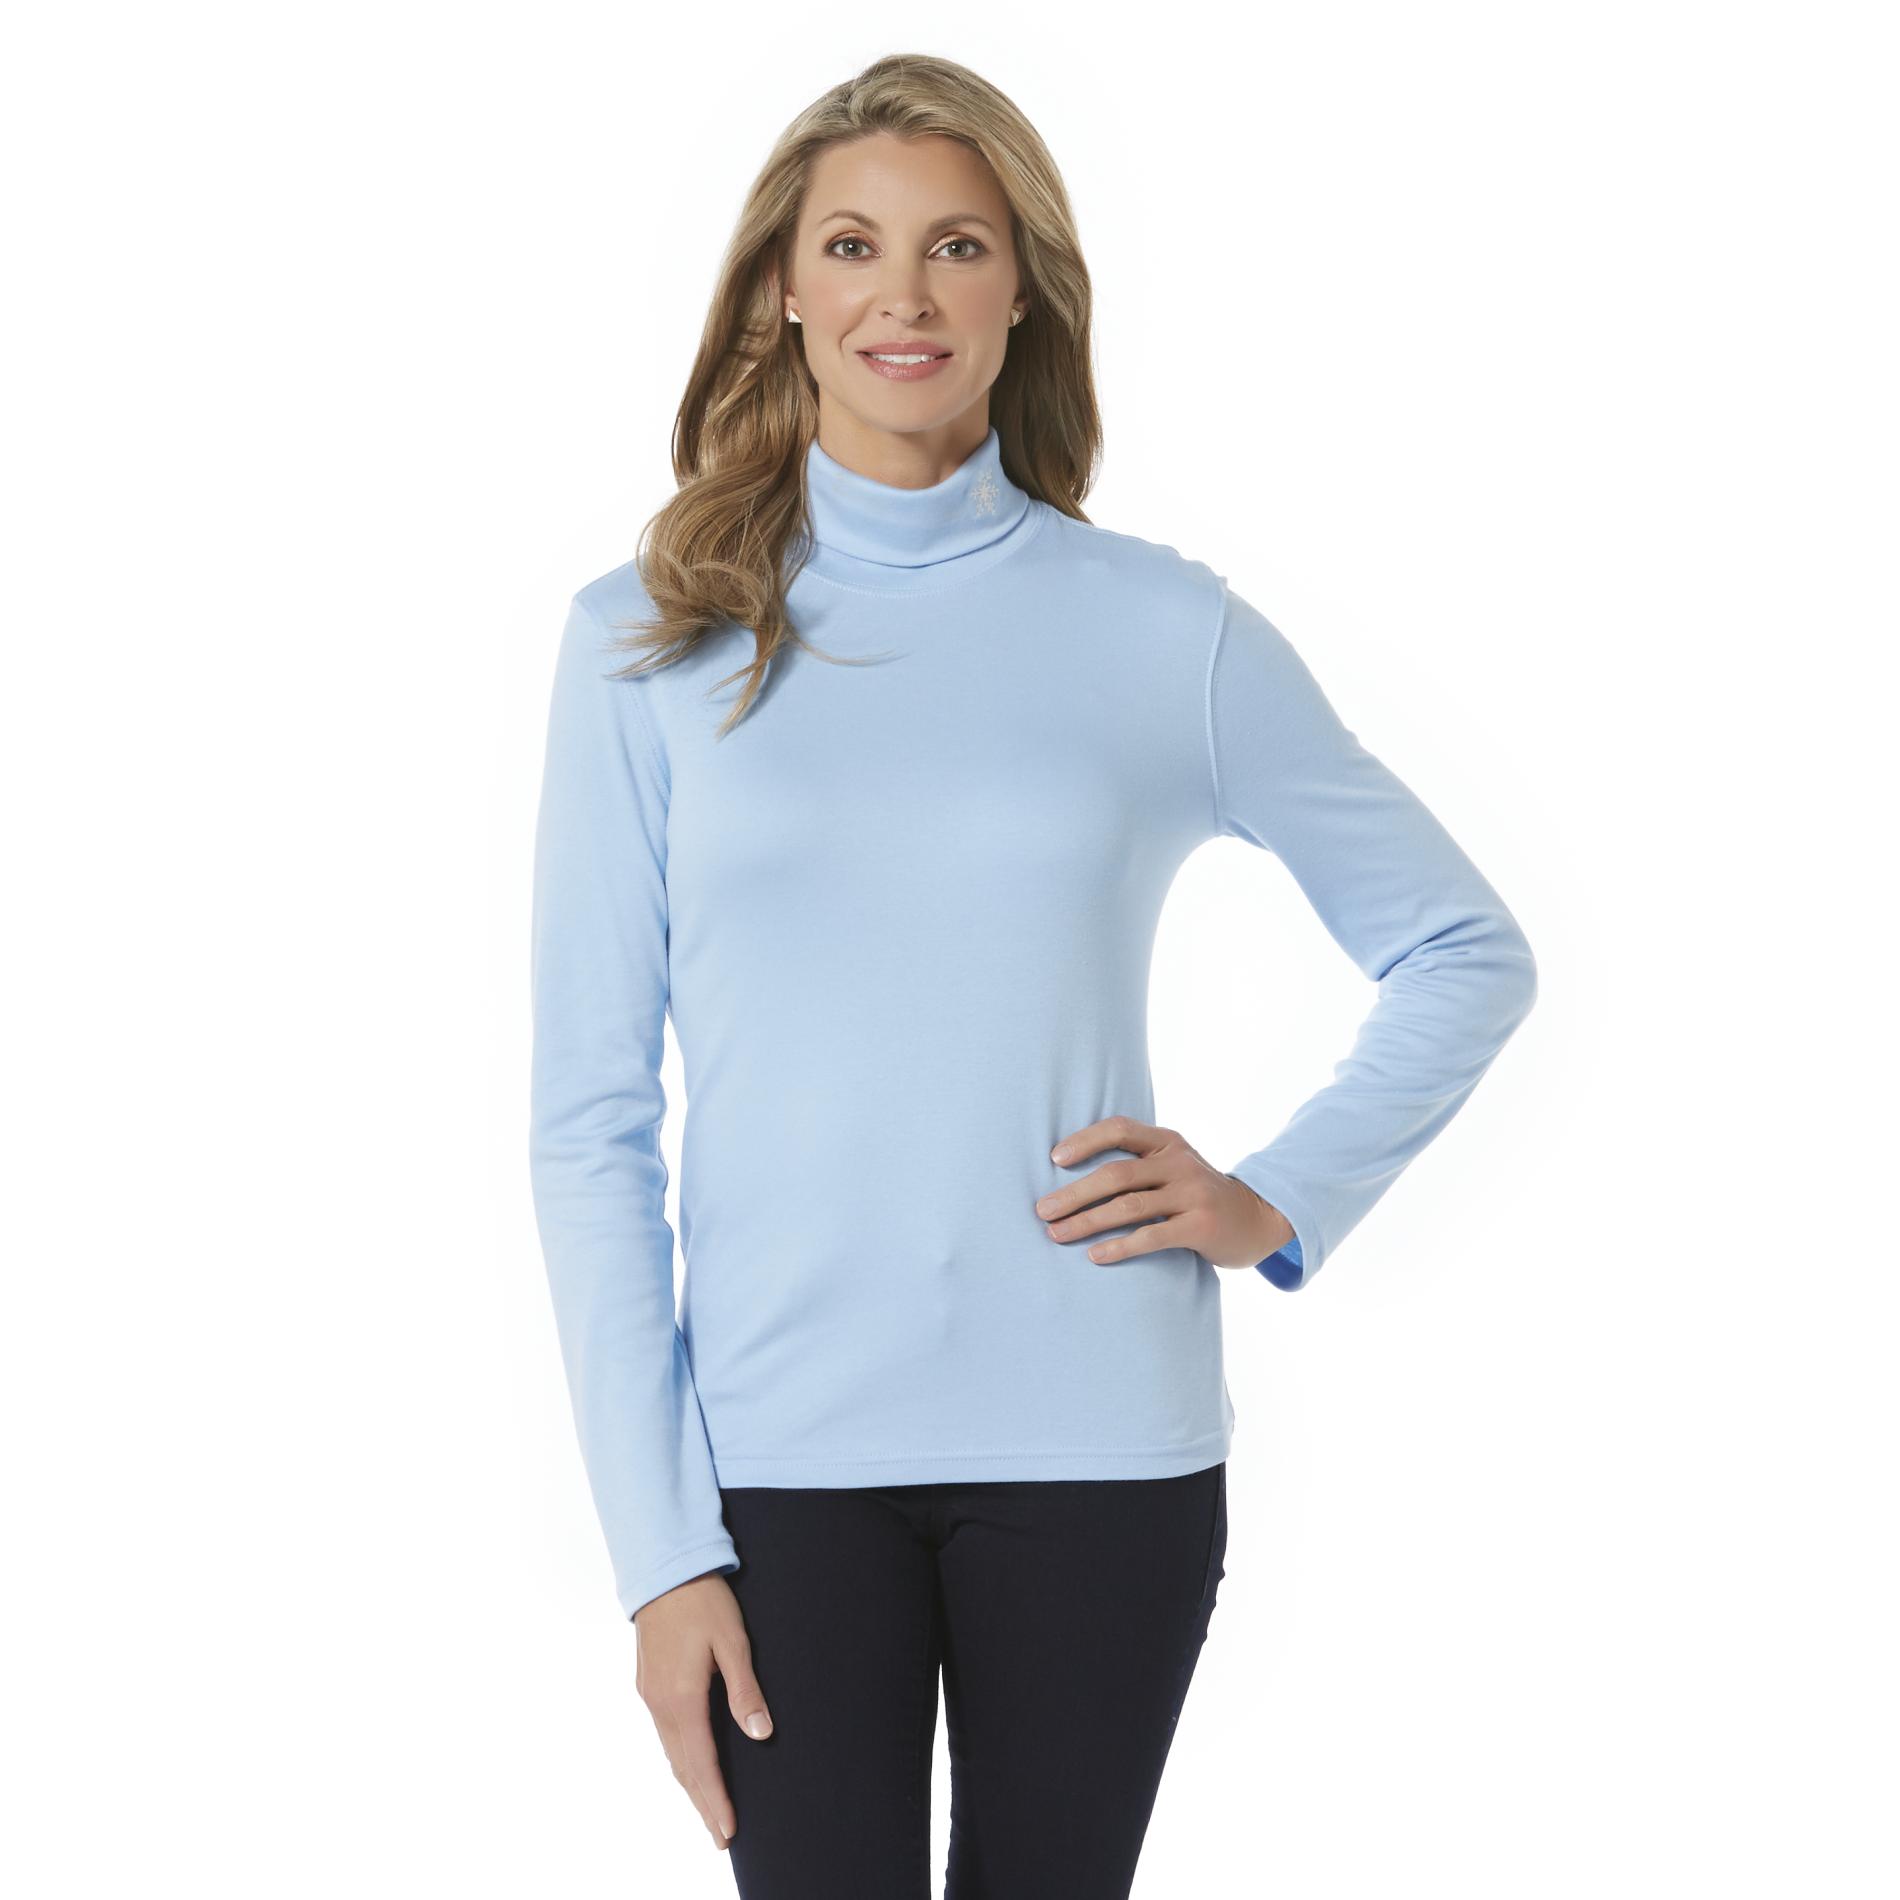 Holiday Editions Women's Embroidered Turtleneck - Snowflake